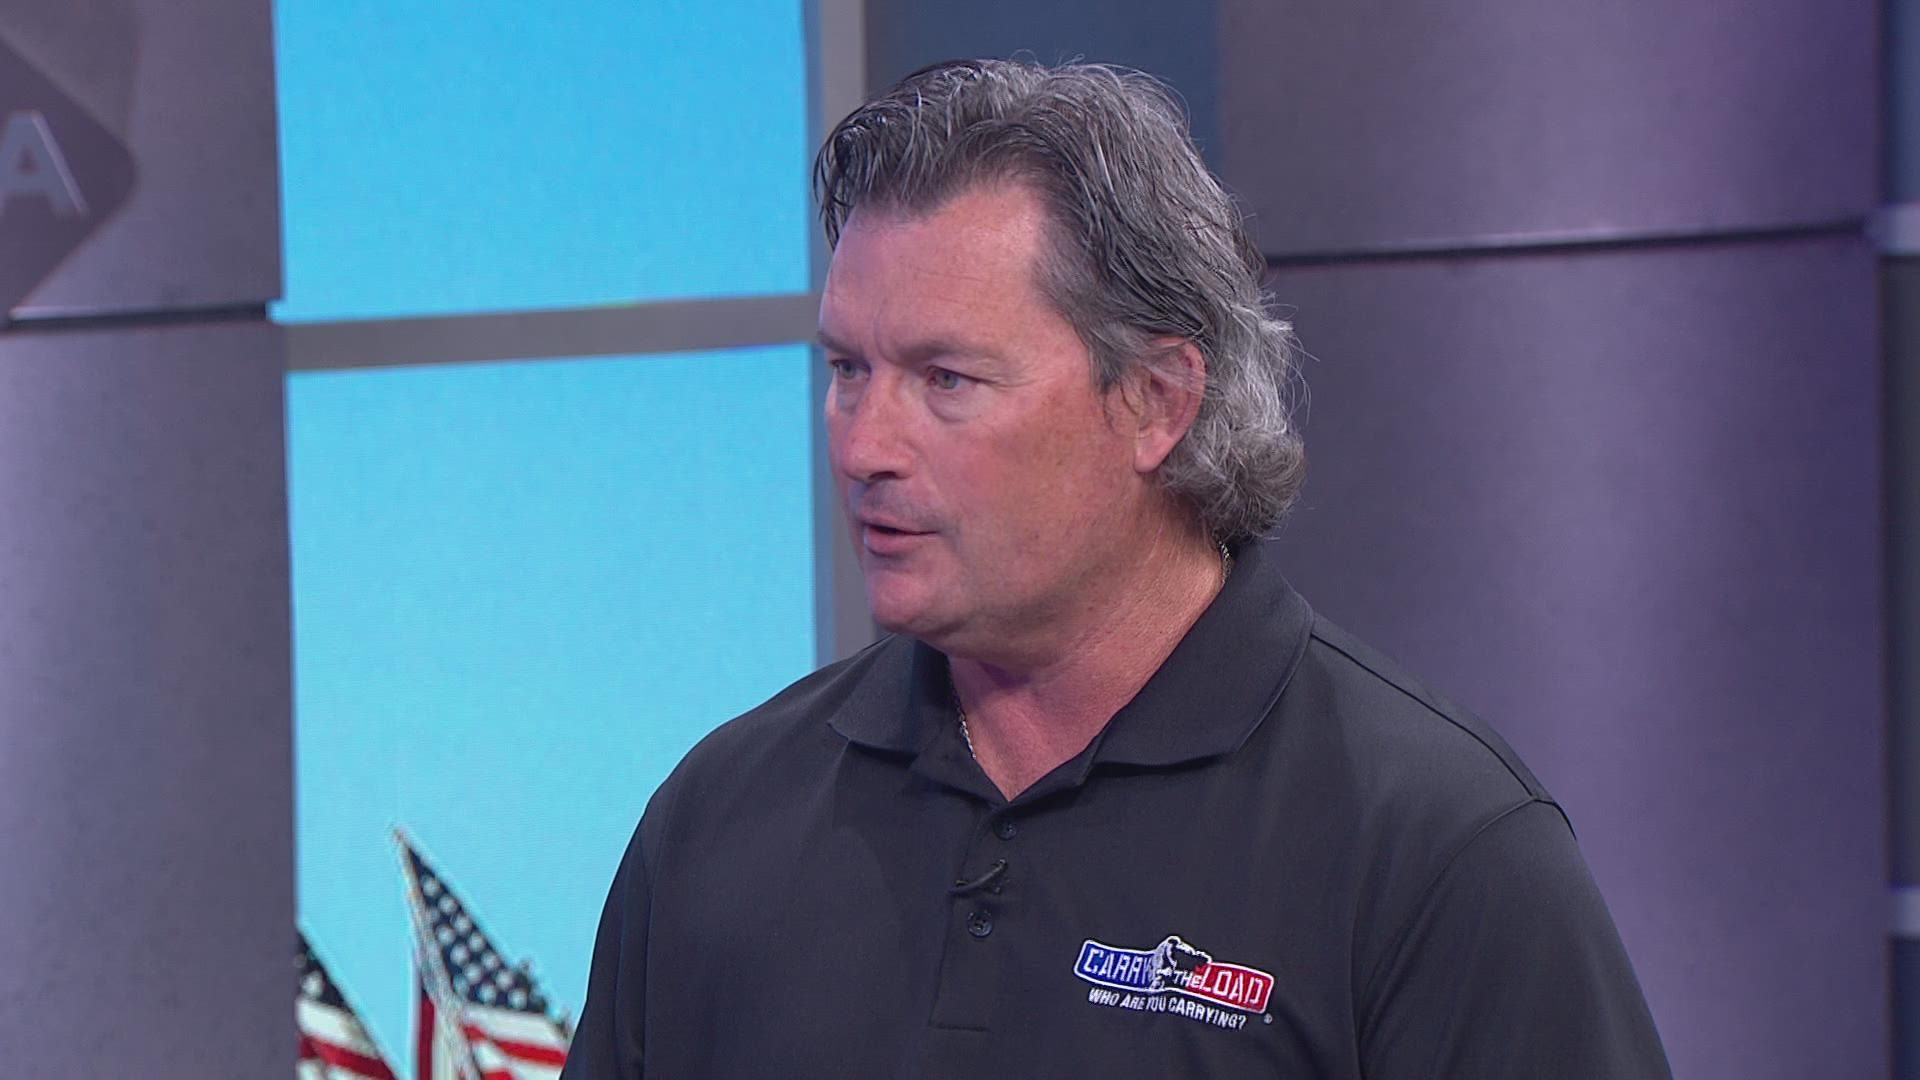 Dallas native Todd Boeding from "Carry the Load" joins WFAA to discuss events happening over the next couple days.